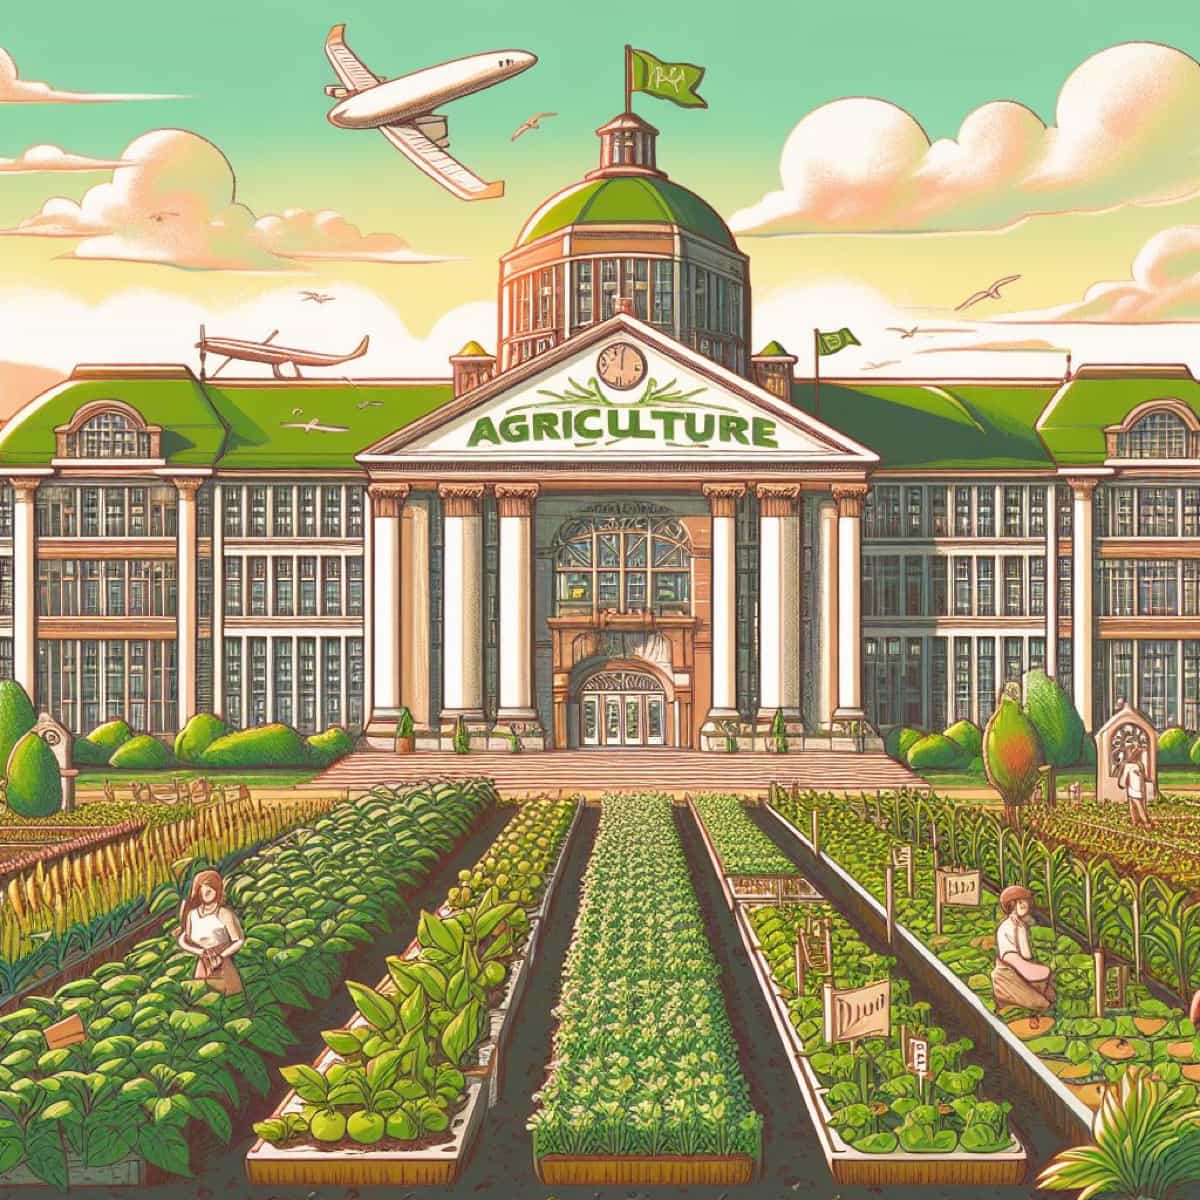 Top 20 Agriculture Universities in India